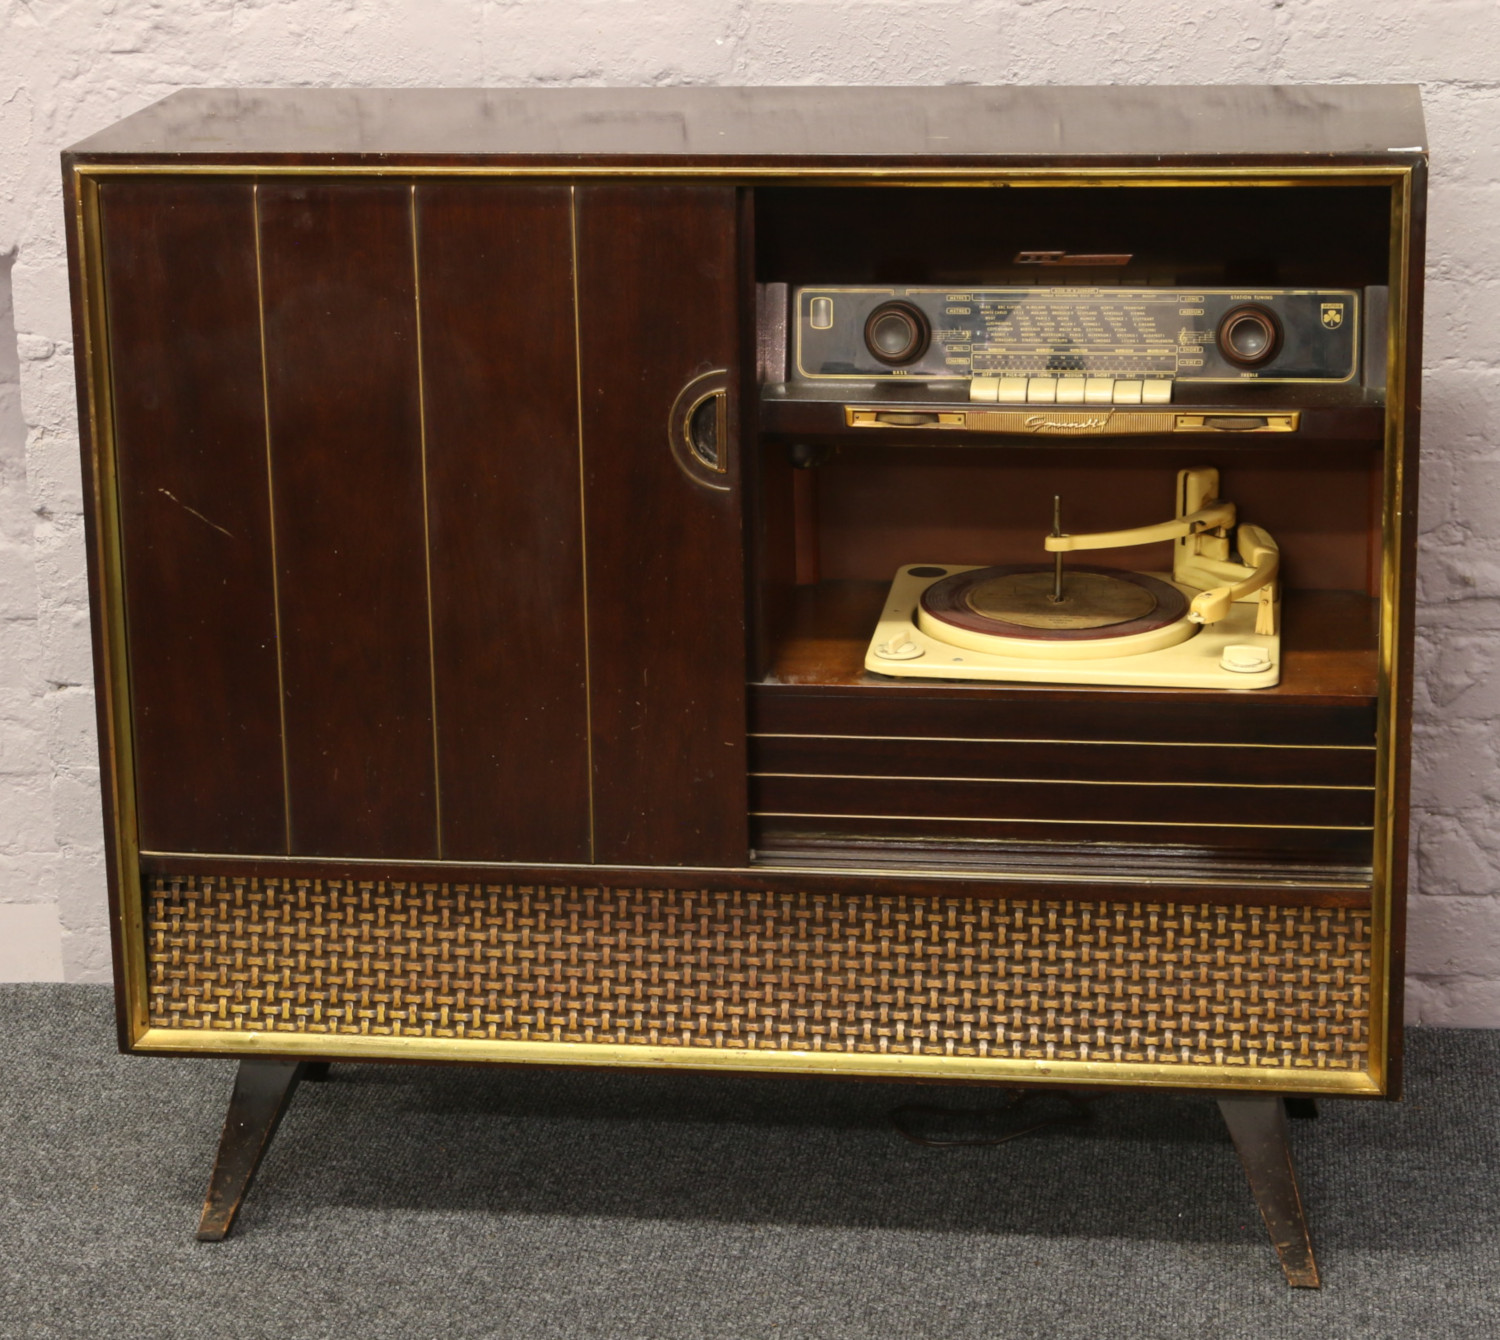 A vintage Grundig Balmoral 7070 3D radiogram with Collaro turntable and built in vinyl record rack.